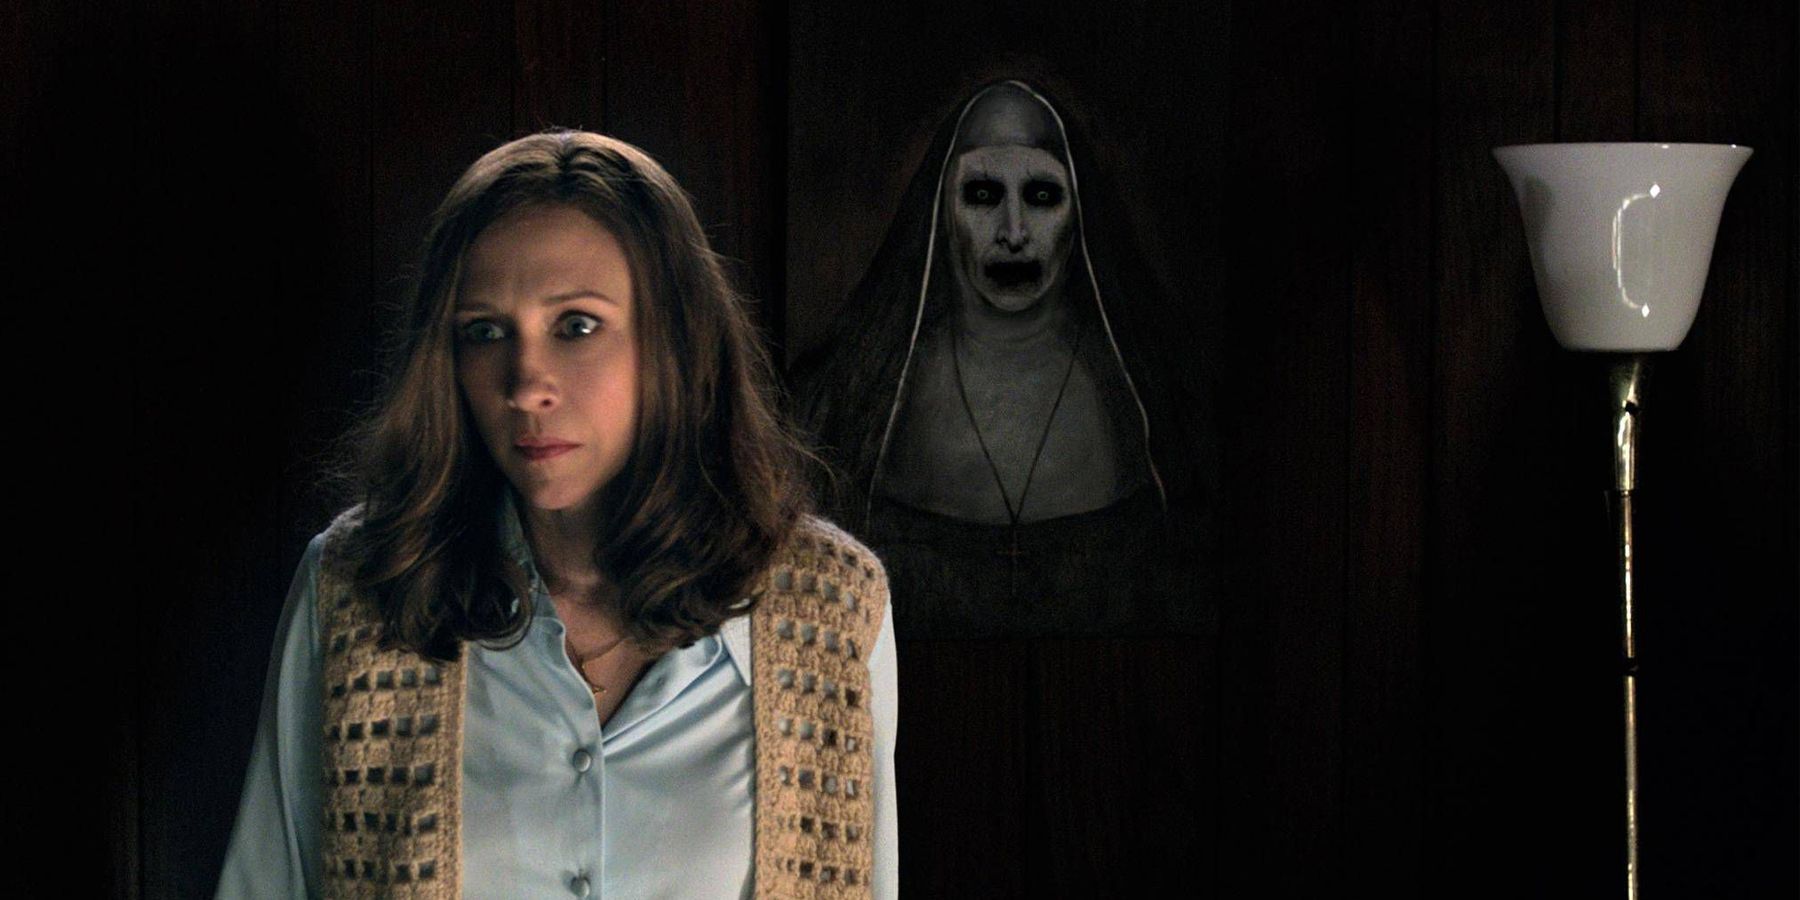 The Conjuring 2 a picture of the Nun character